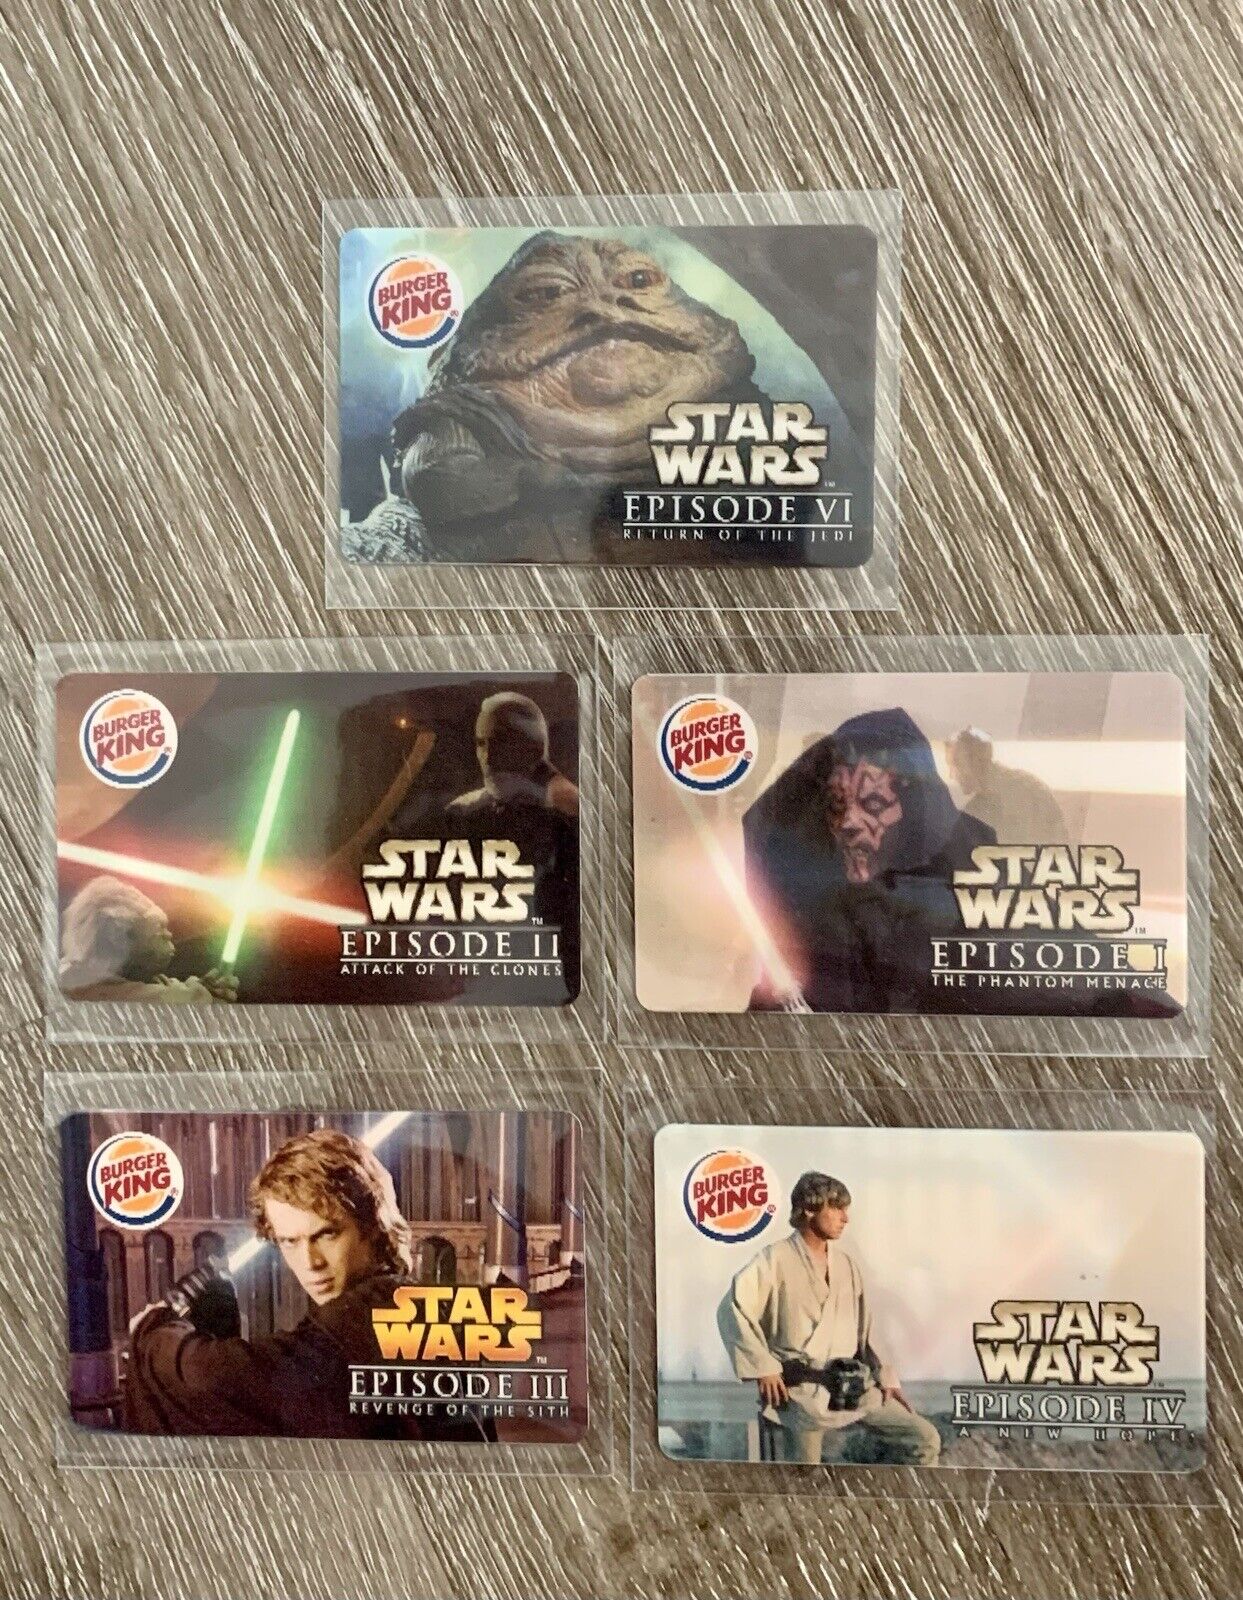 Star Wars 2005 BURGER KING Complete Saga Crown GIFT CARDS Lot of 5 Collection